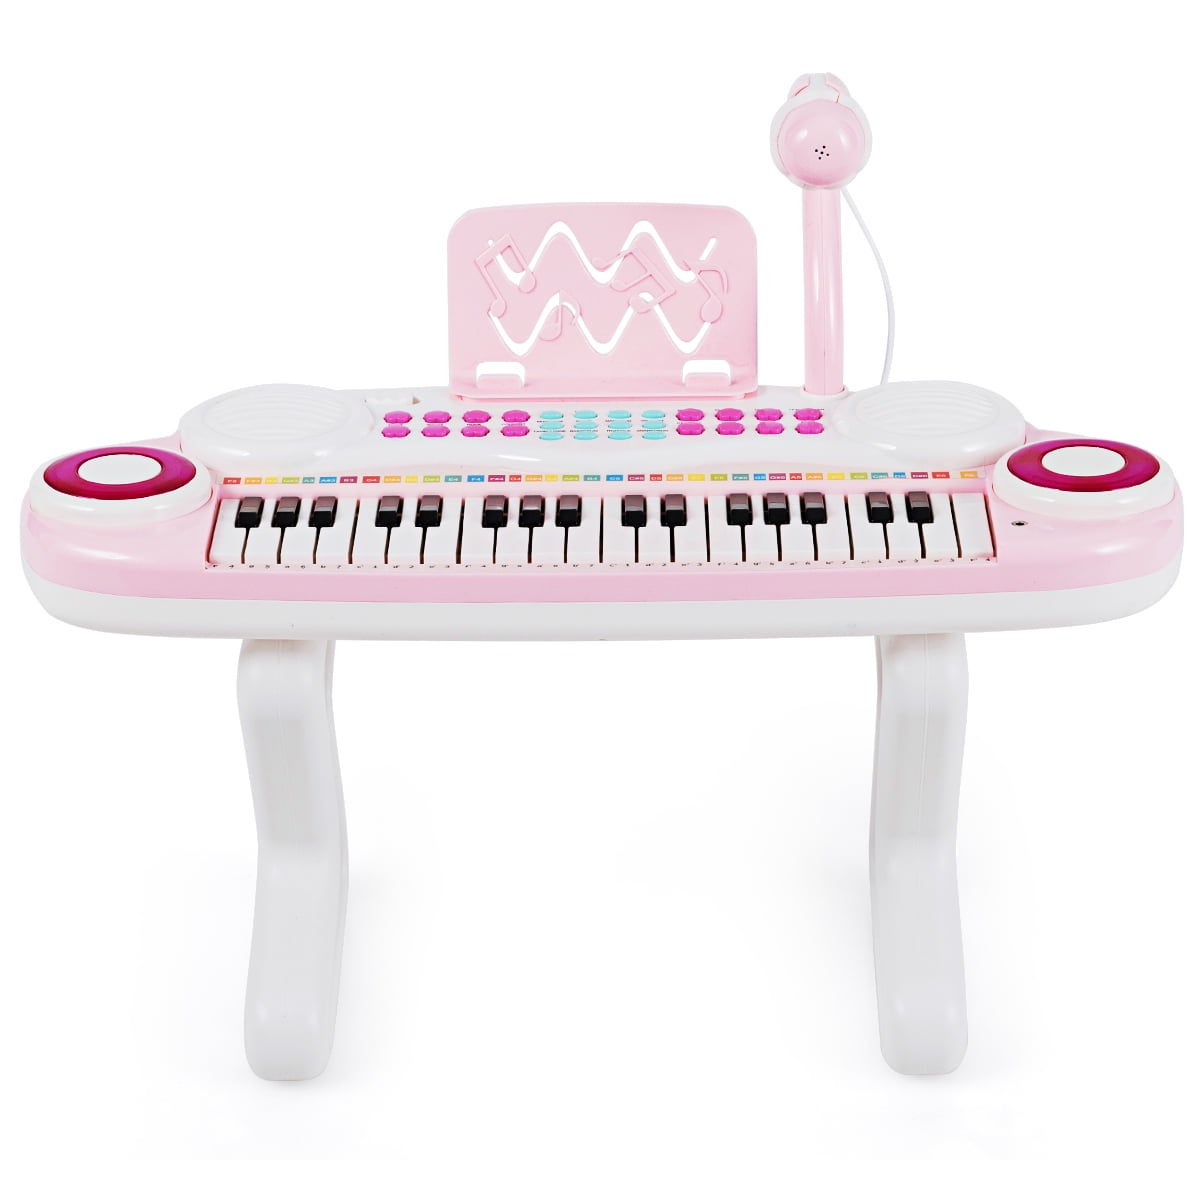 Hering Piano Country toy piano